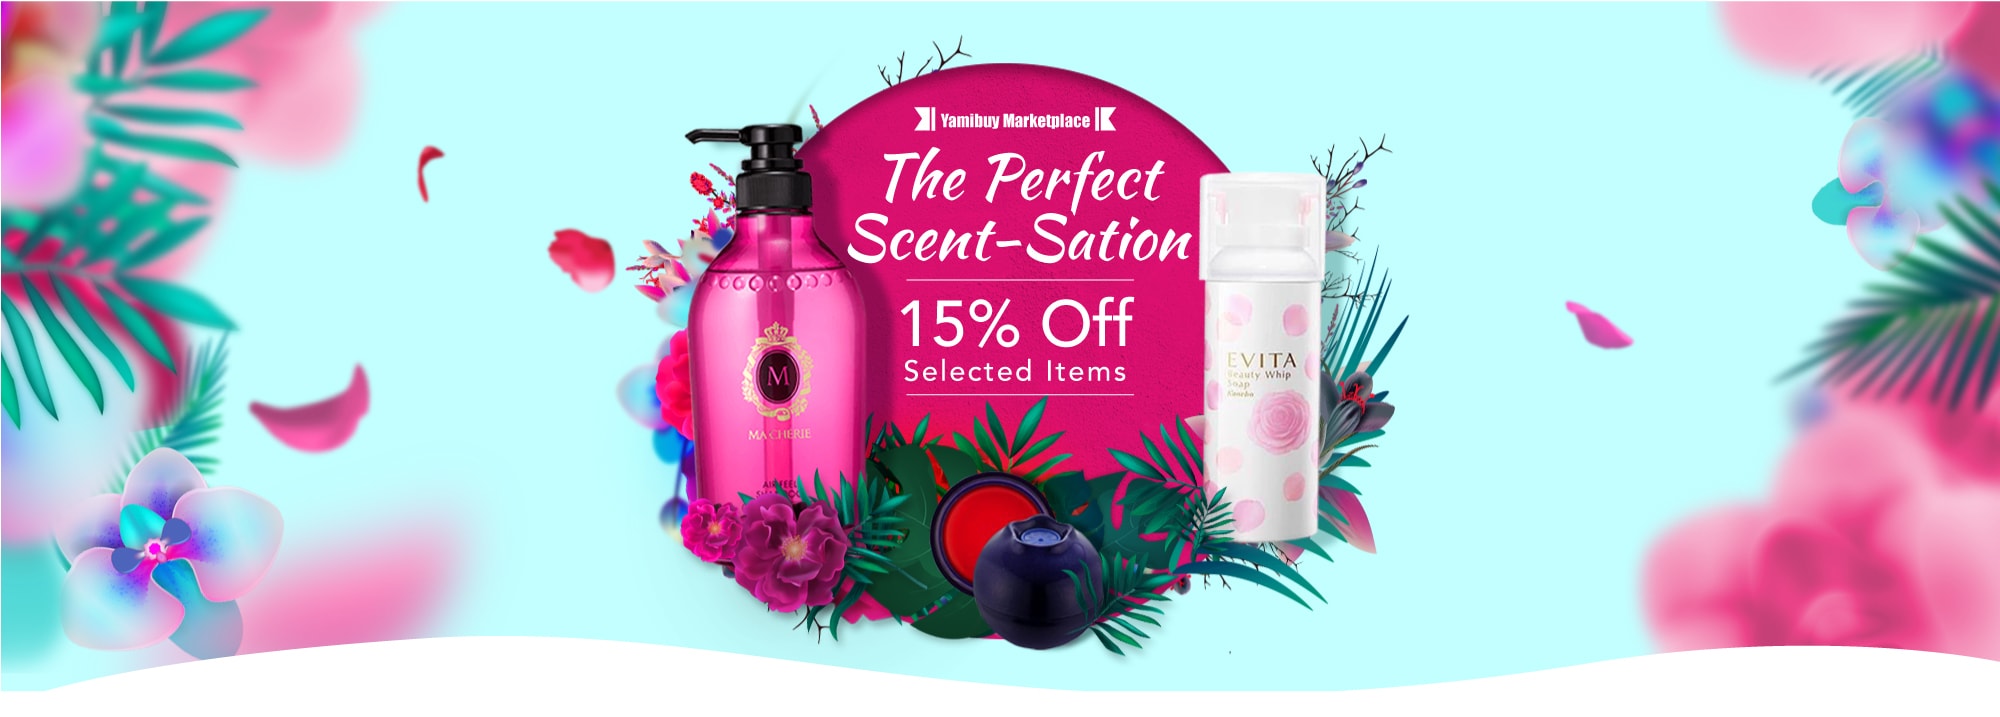 The Perfect Scent-Sation Story